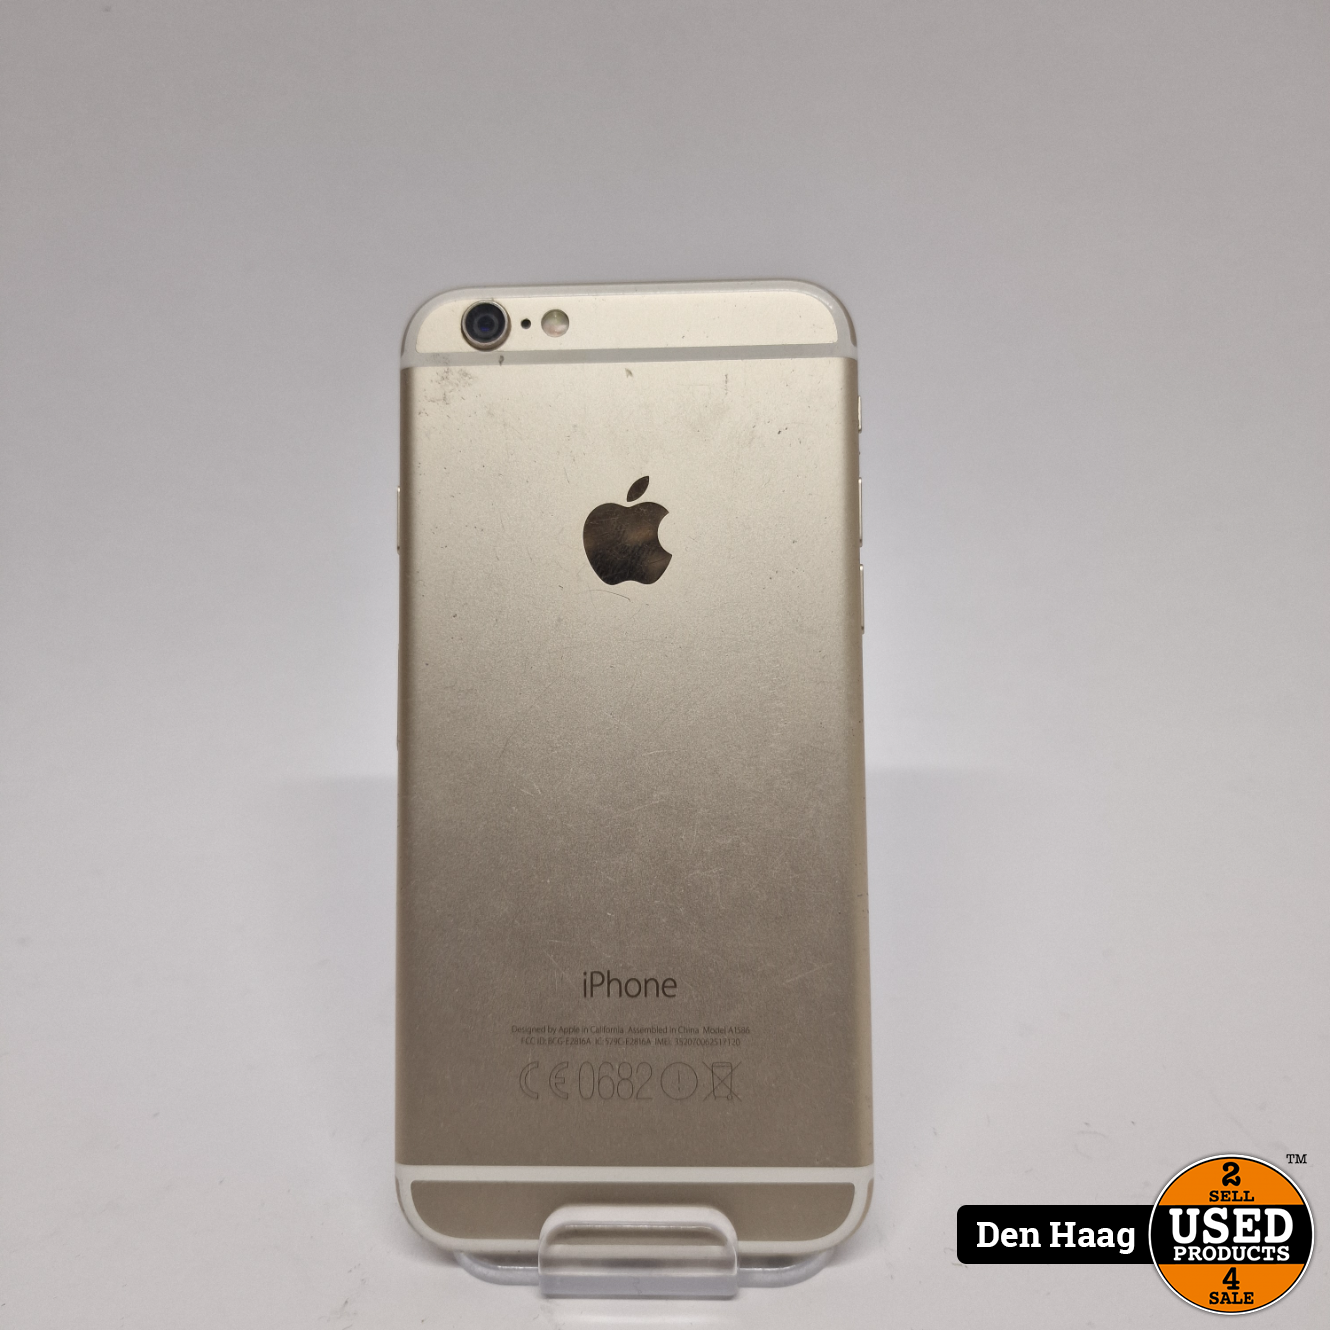 Apple iPhone 6 64Gb Gold batterij 97% | incl - Used Products Den Haag